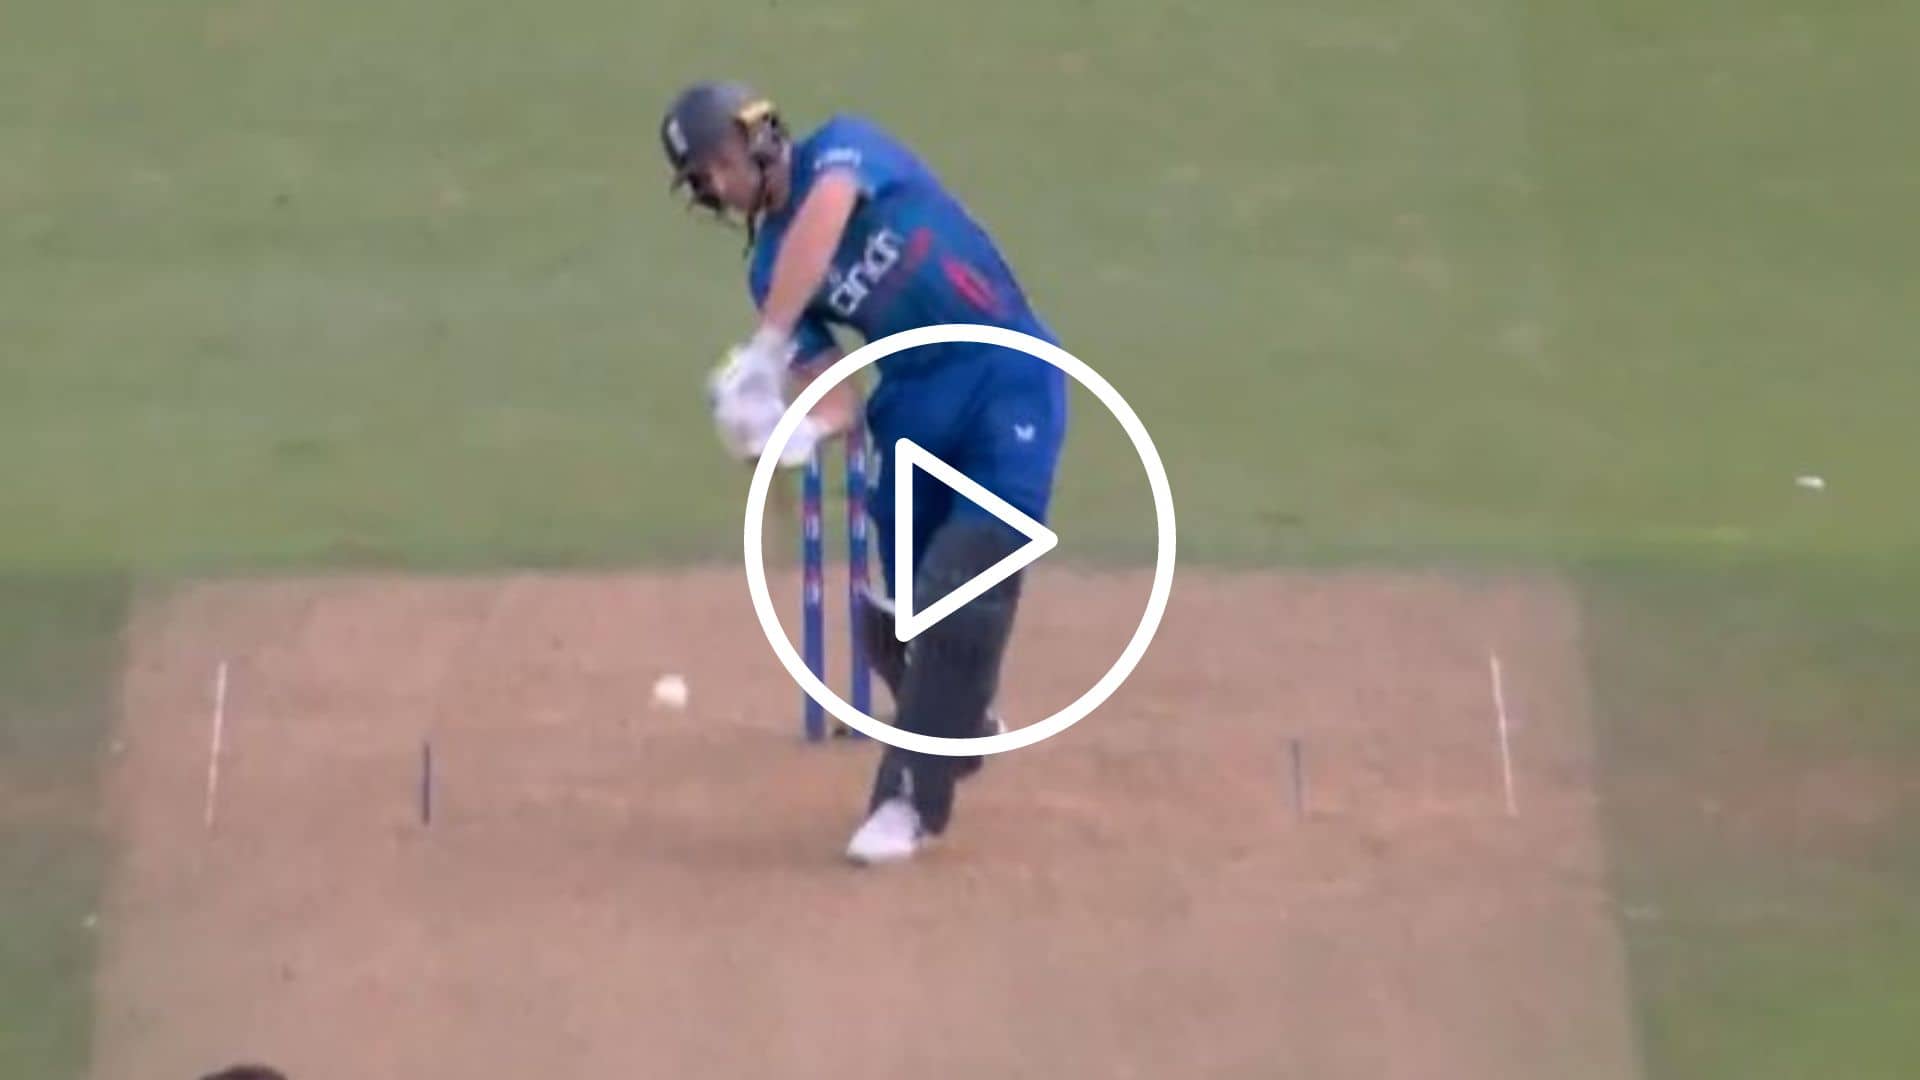 [Watch] Jos Buttler's 'Stand And Deliver' Six Against Trent Boult